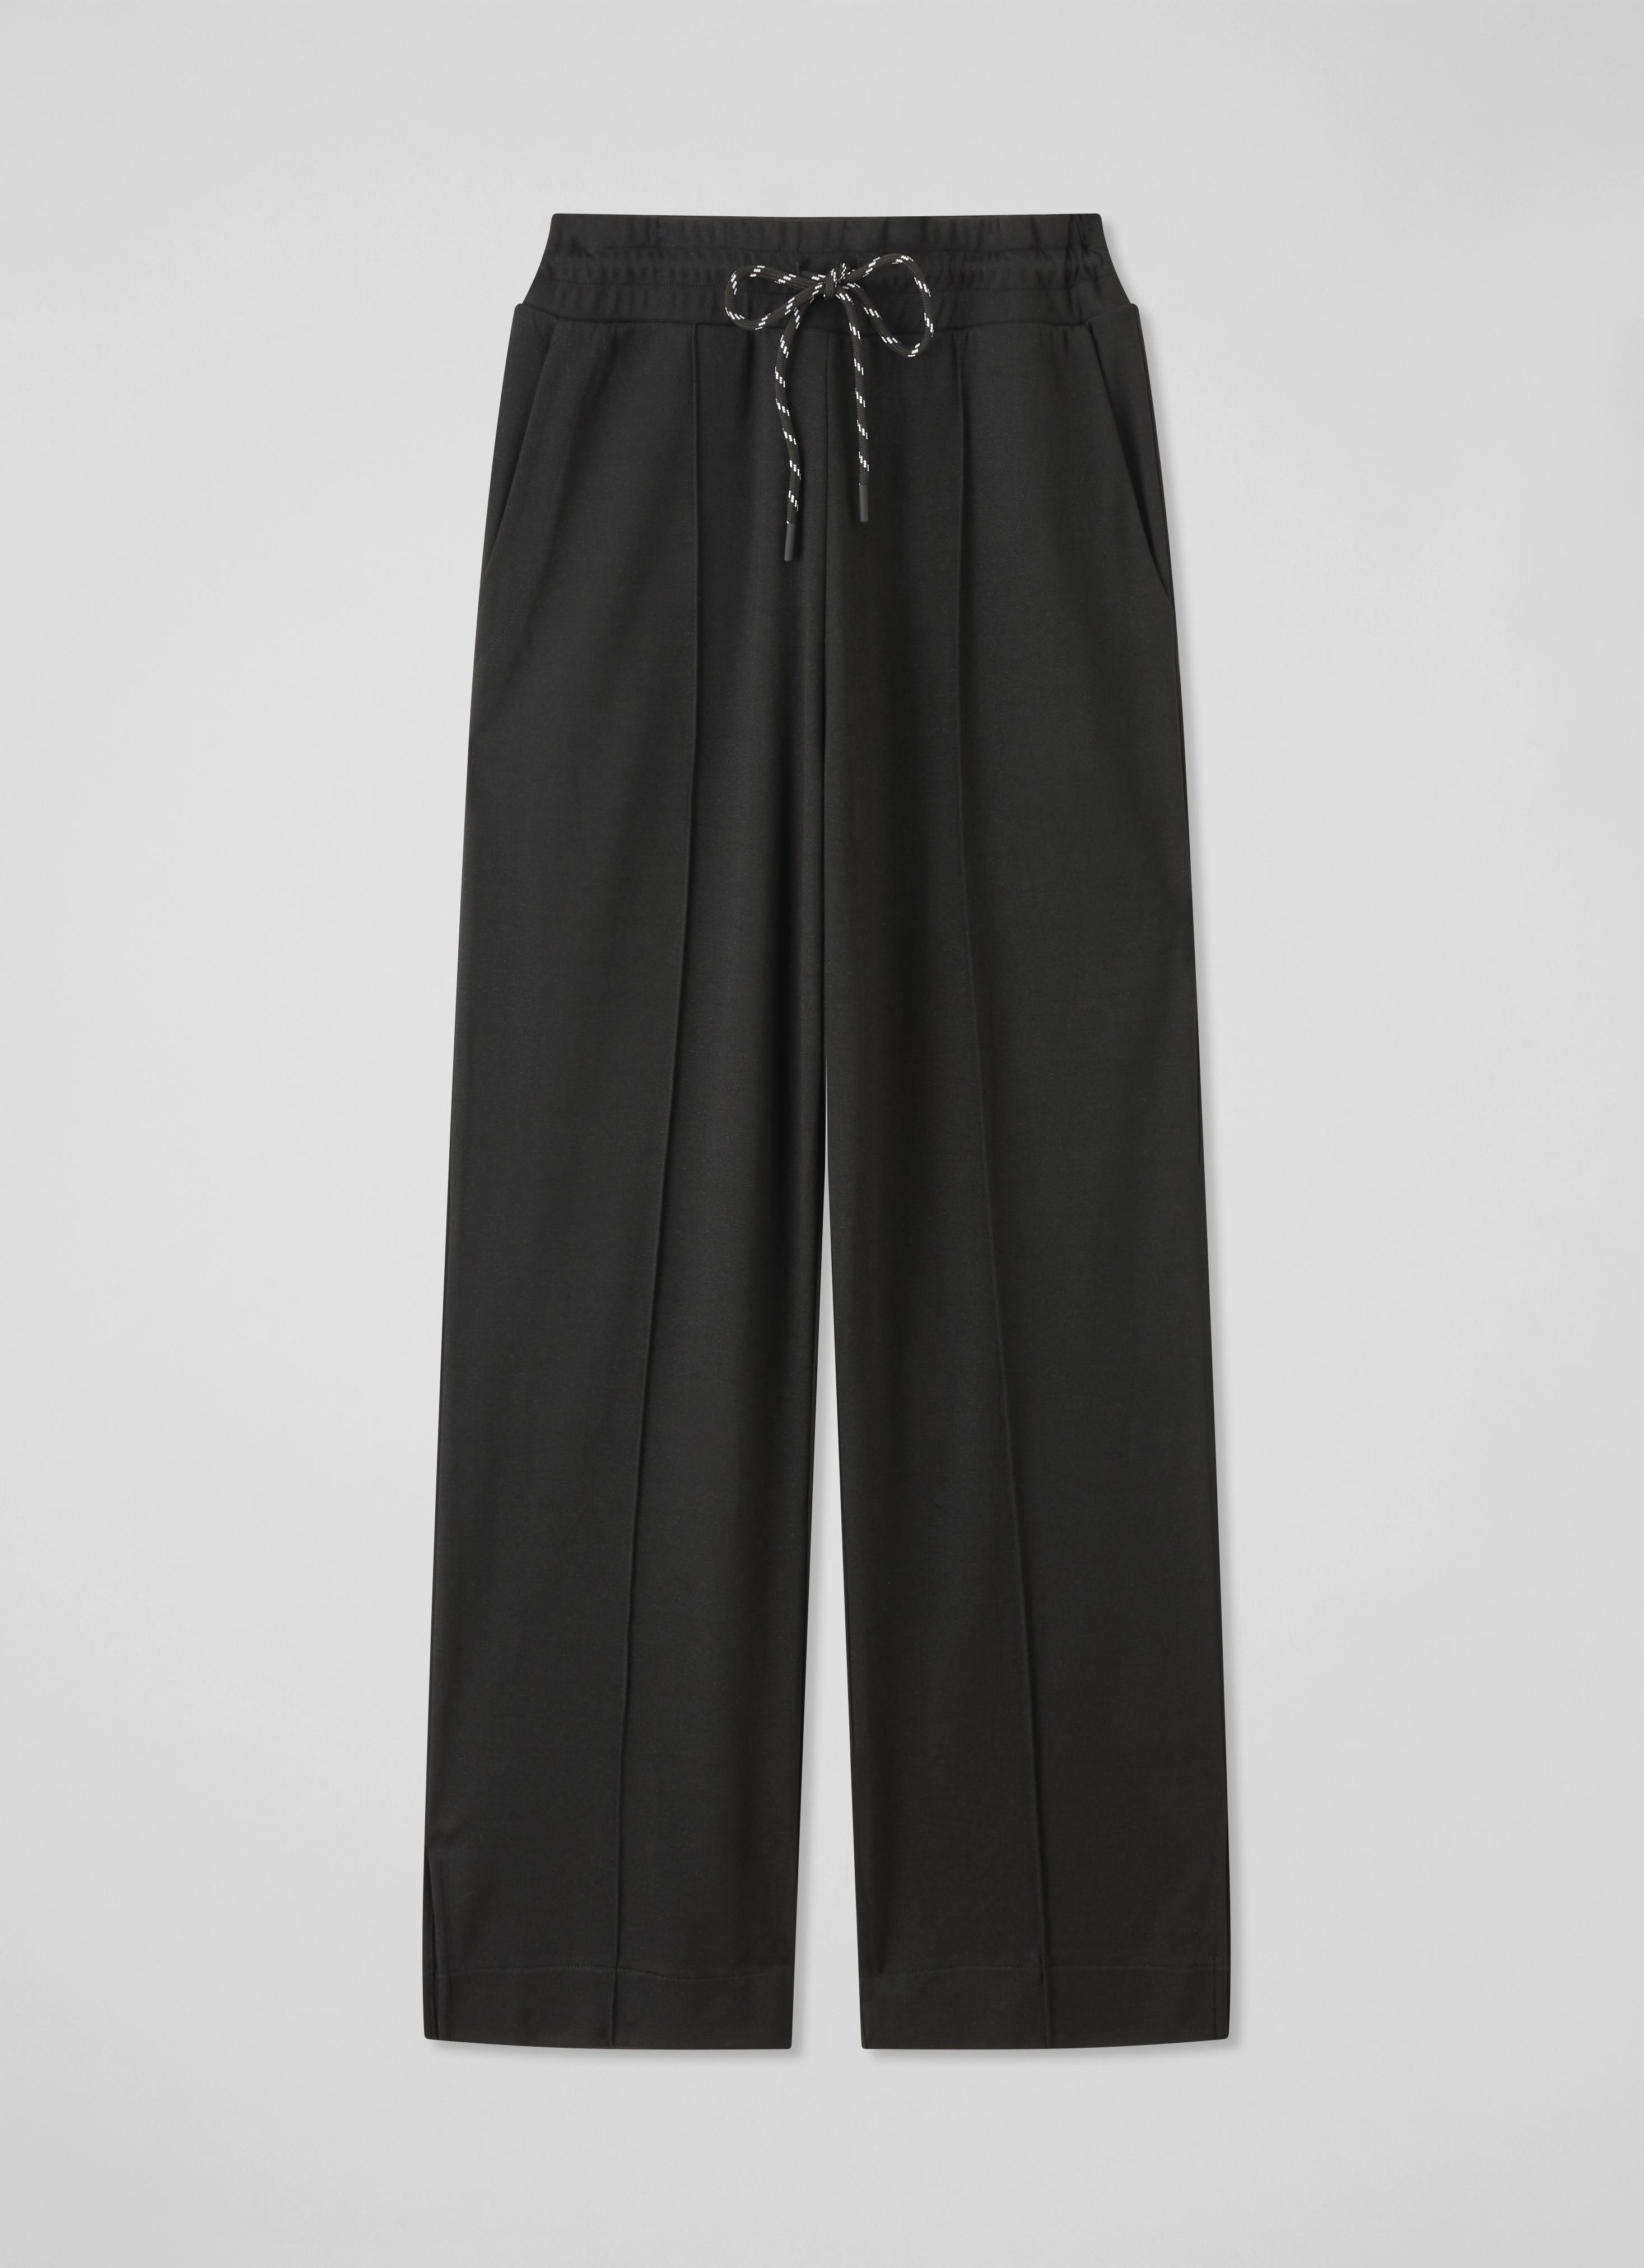 Womens Trousers Sale Ladies Clothing